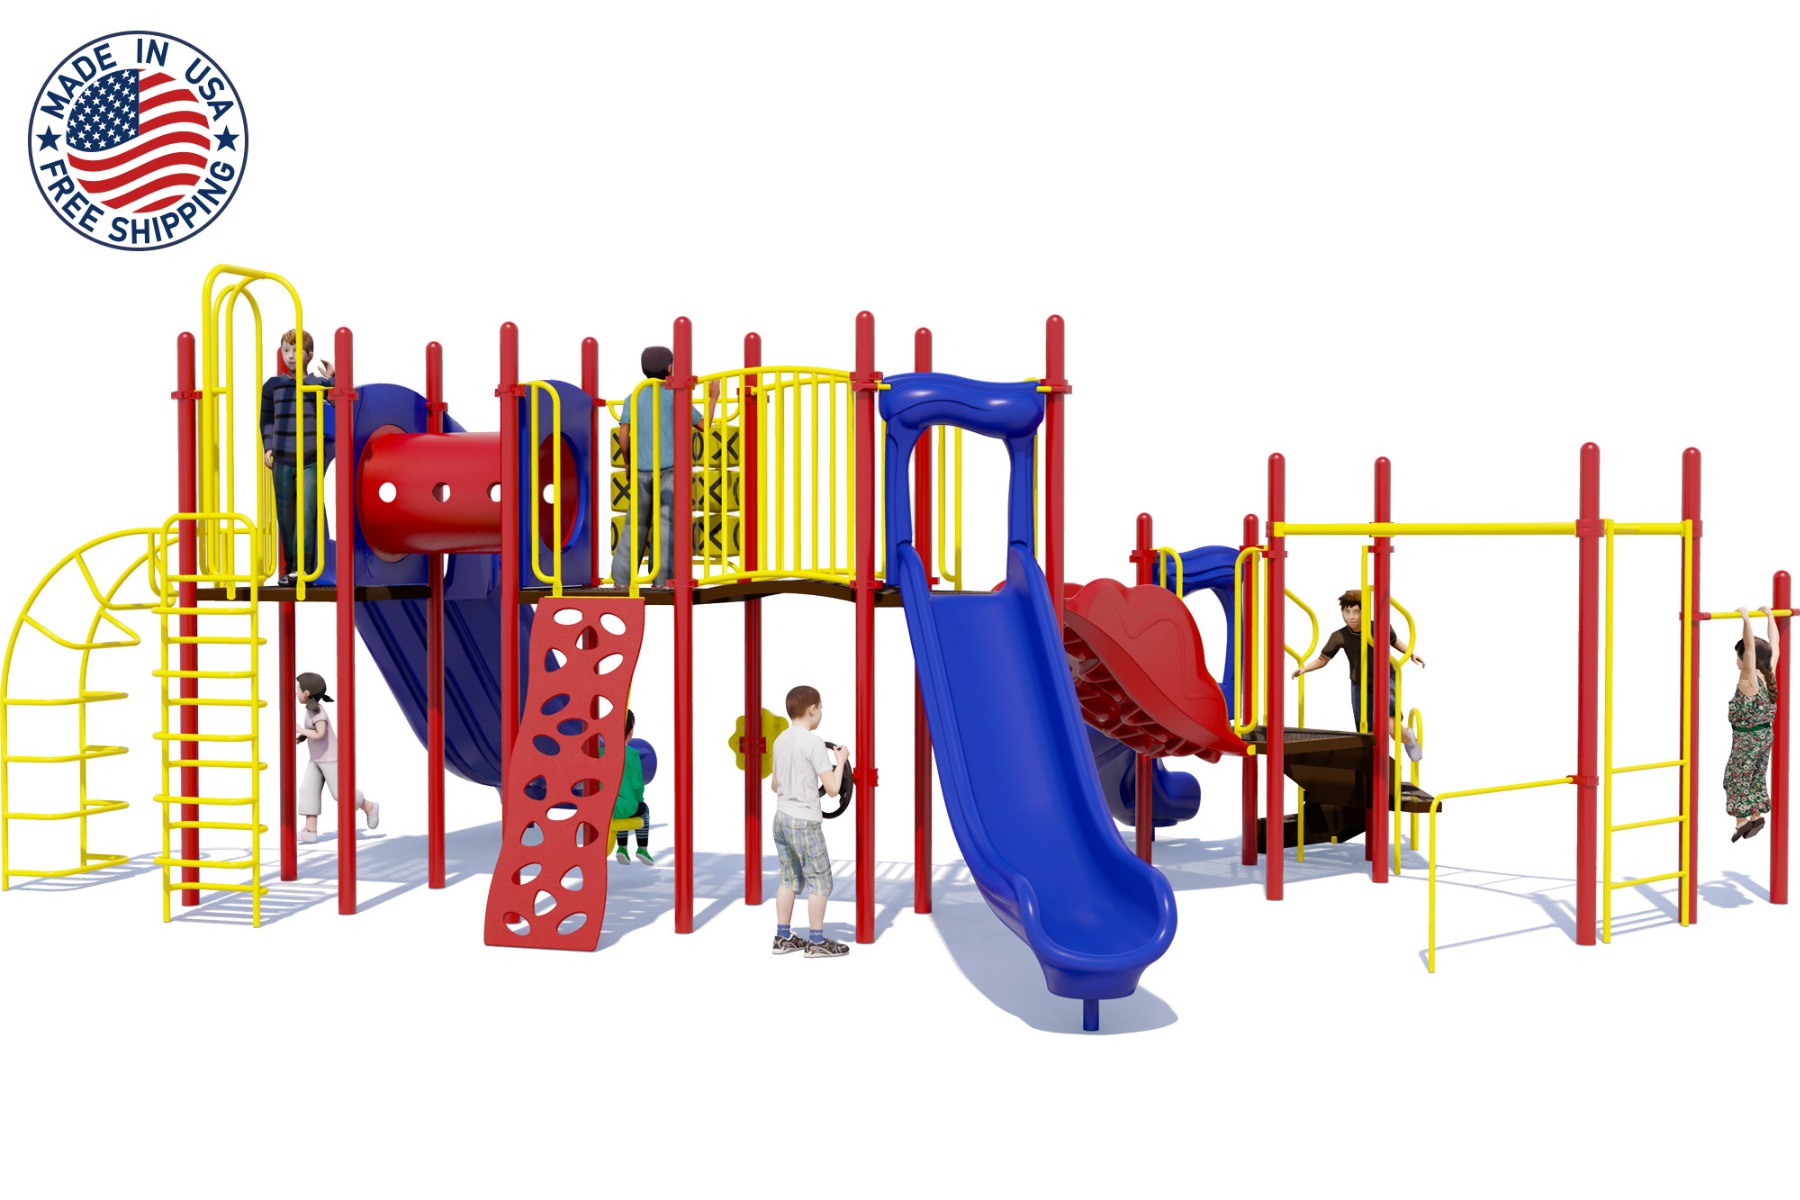 Rear View - Budget Playground Structure - American Parks Company